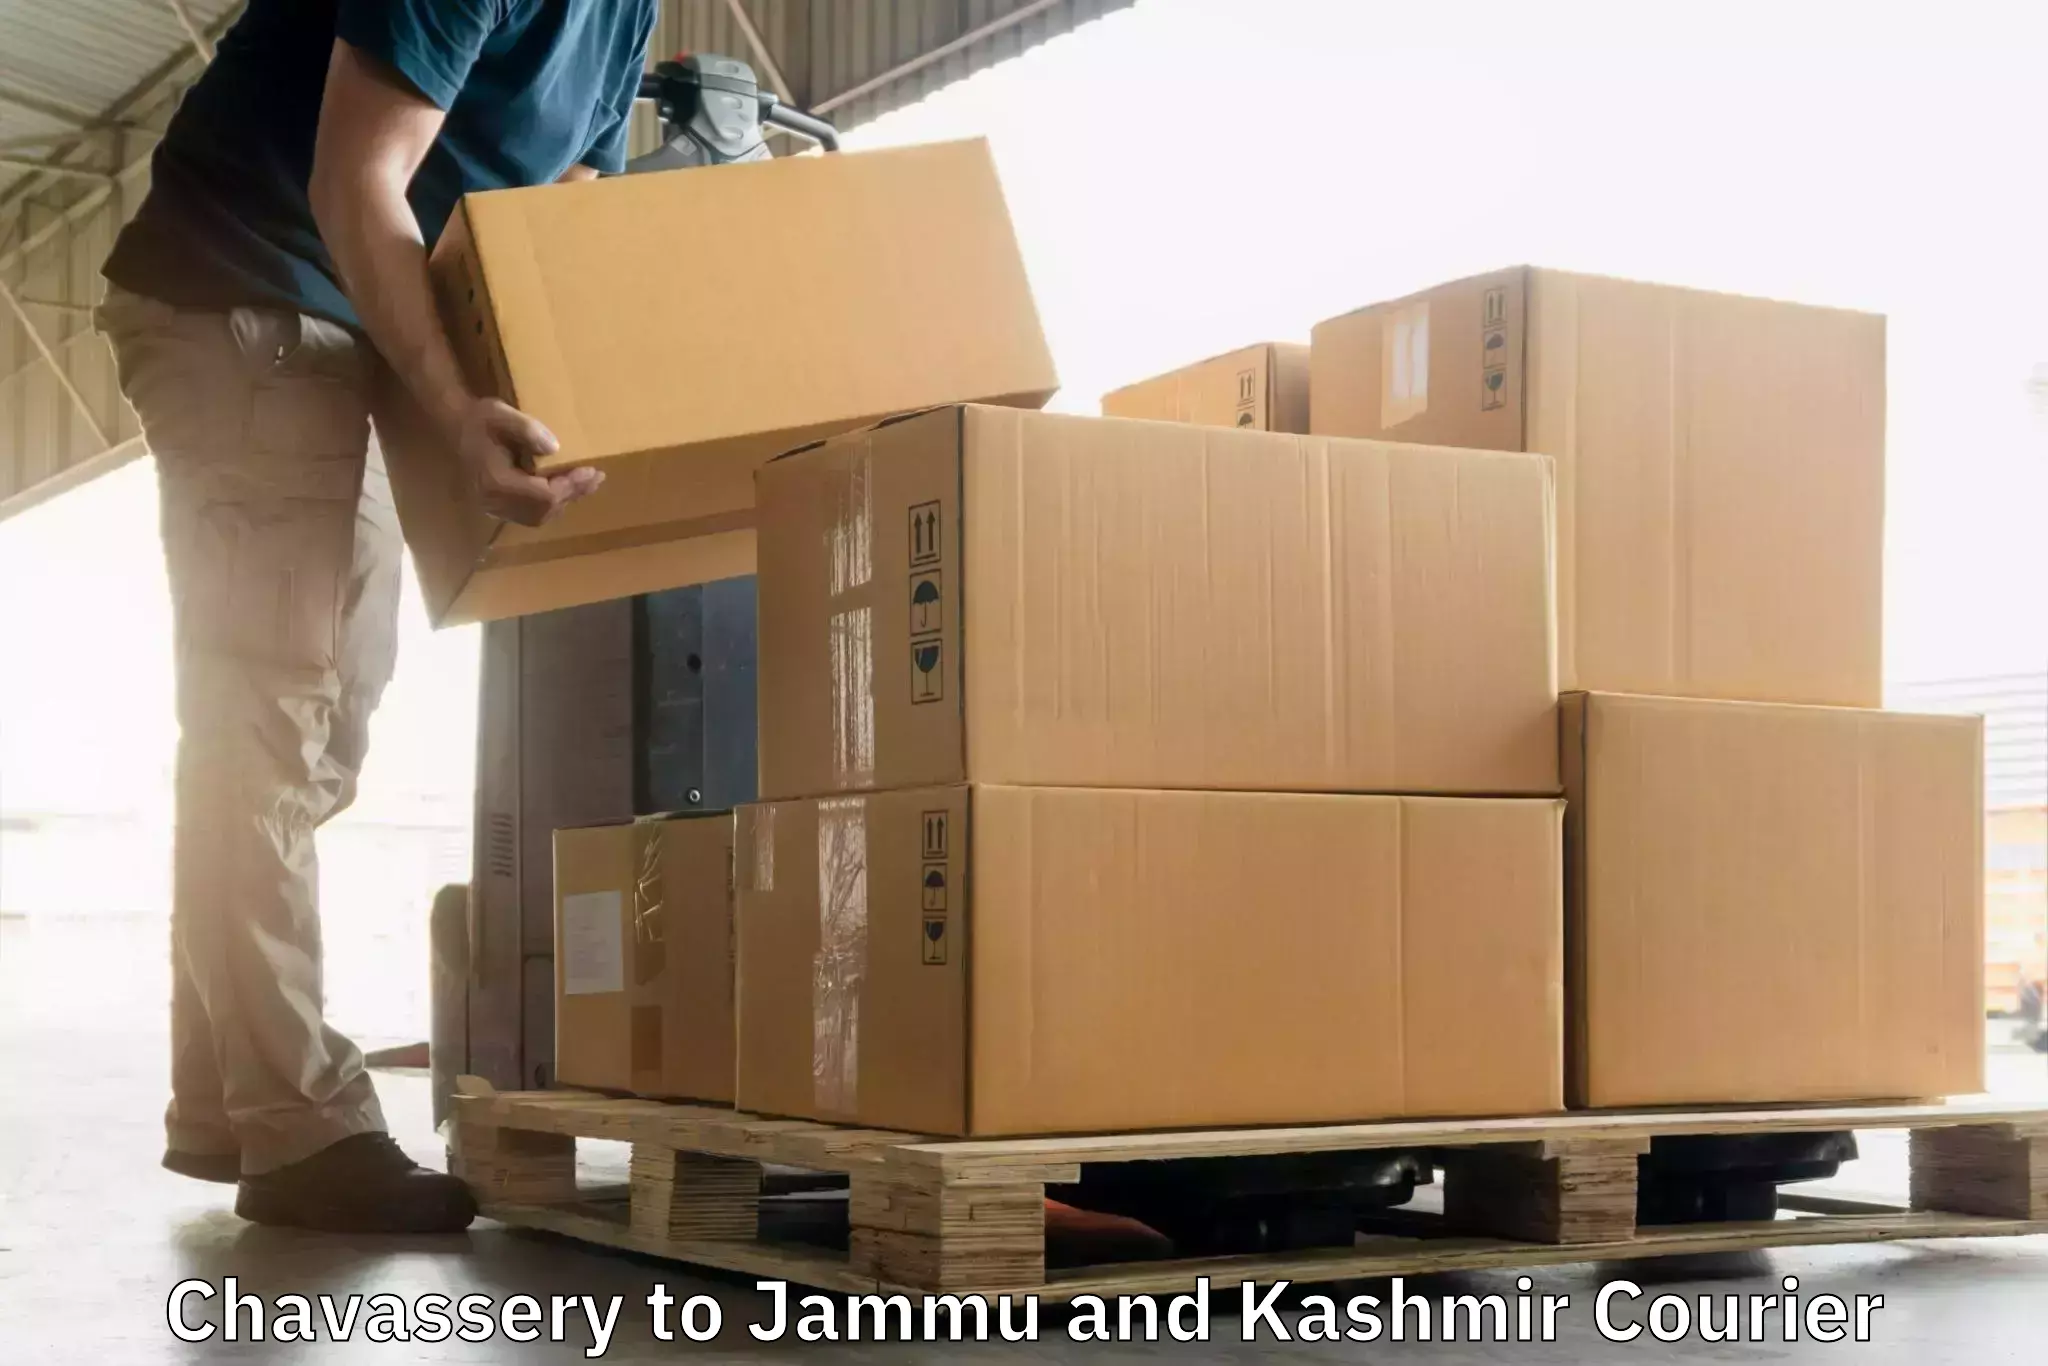 Express delivery capabilities Chavassery to Reasi